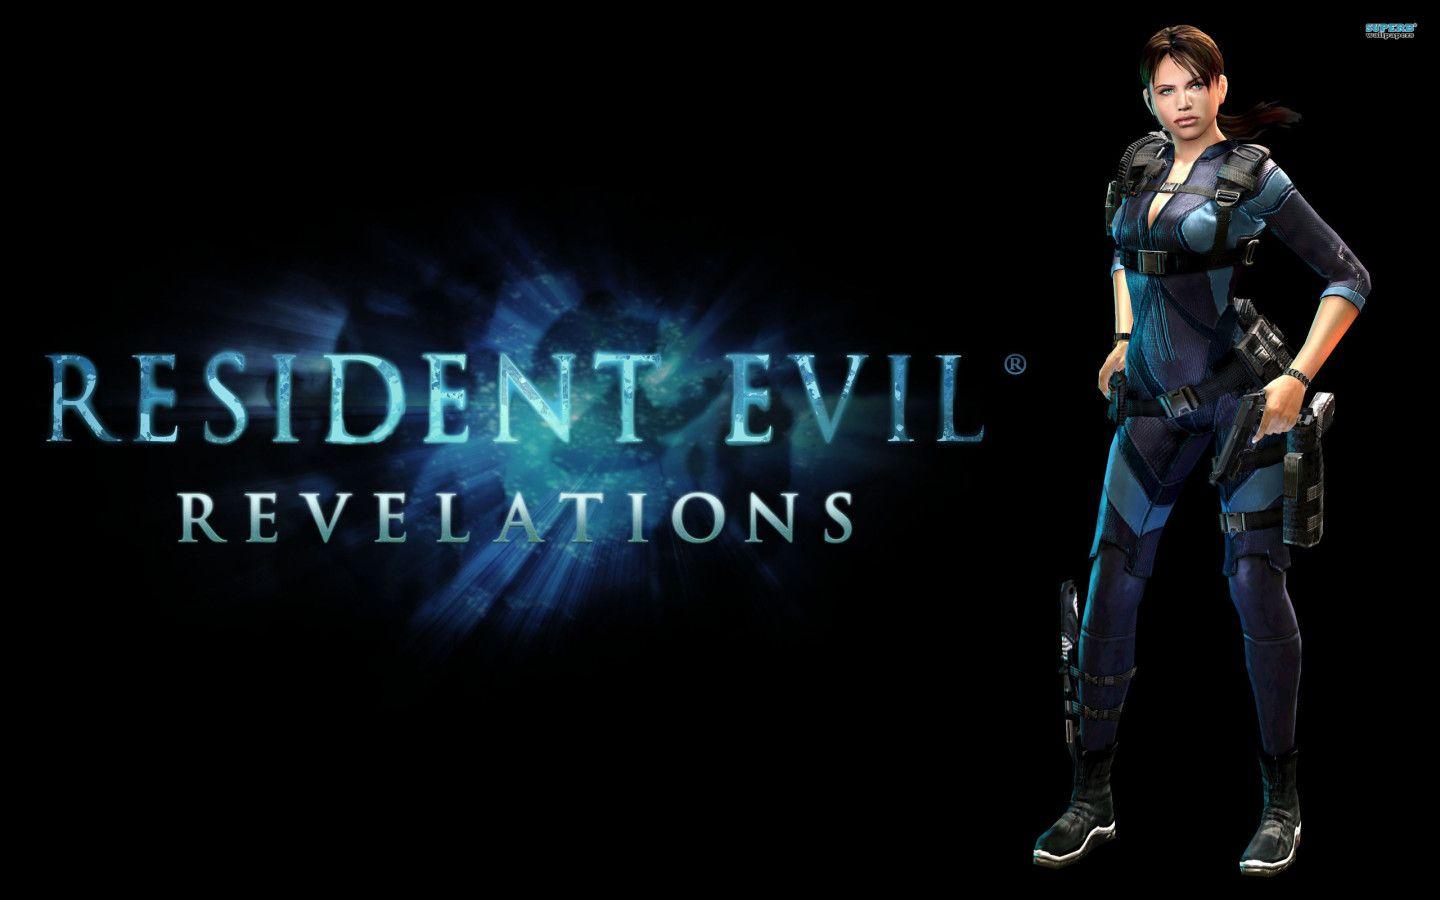 Resident evil revelations game wallpaper HD game play games HD